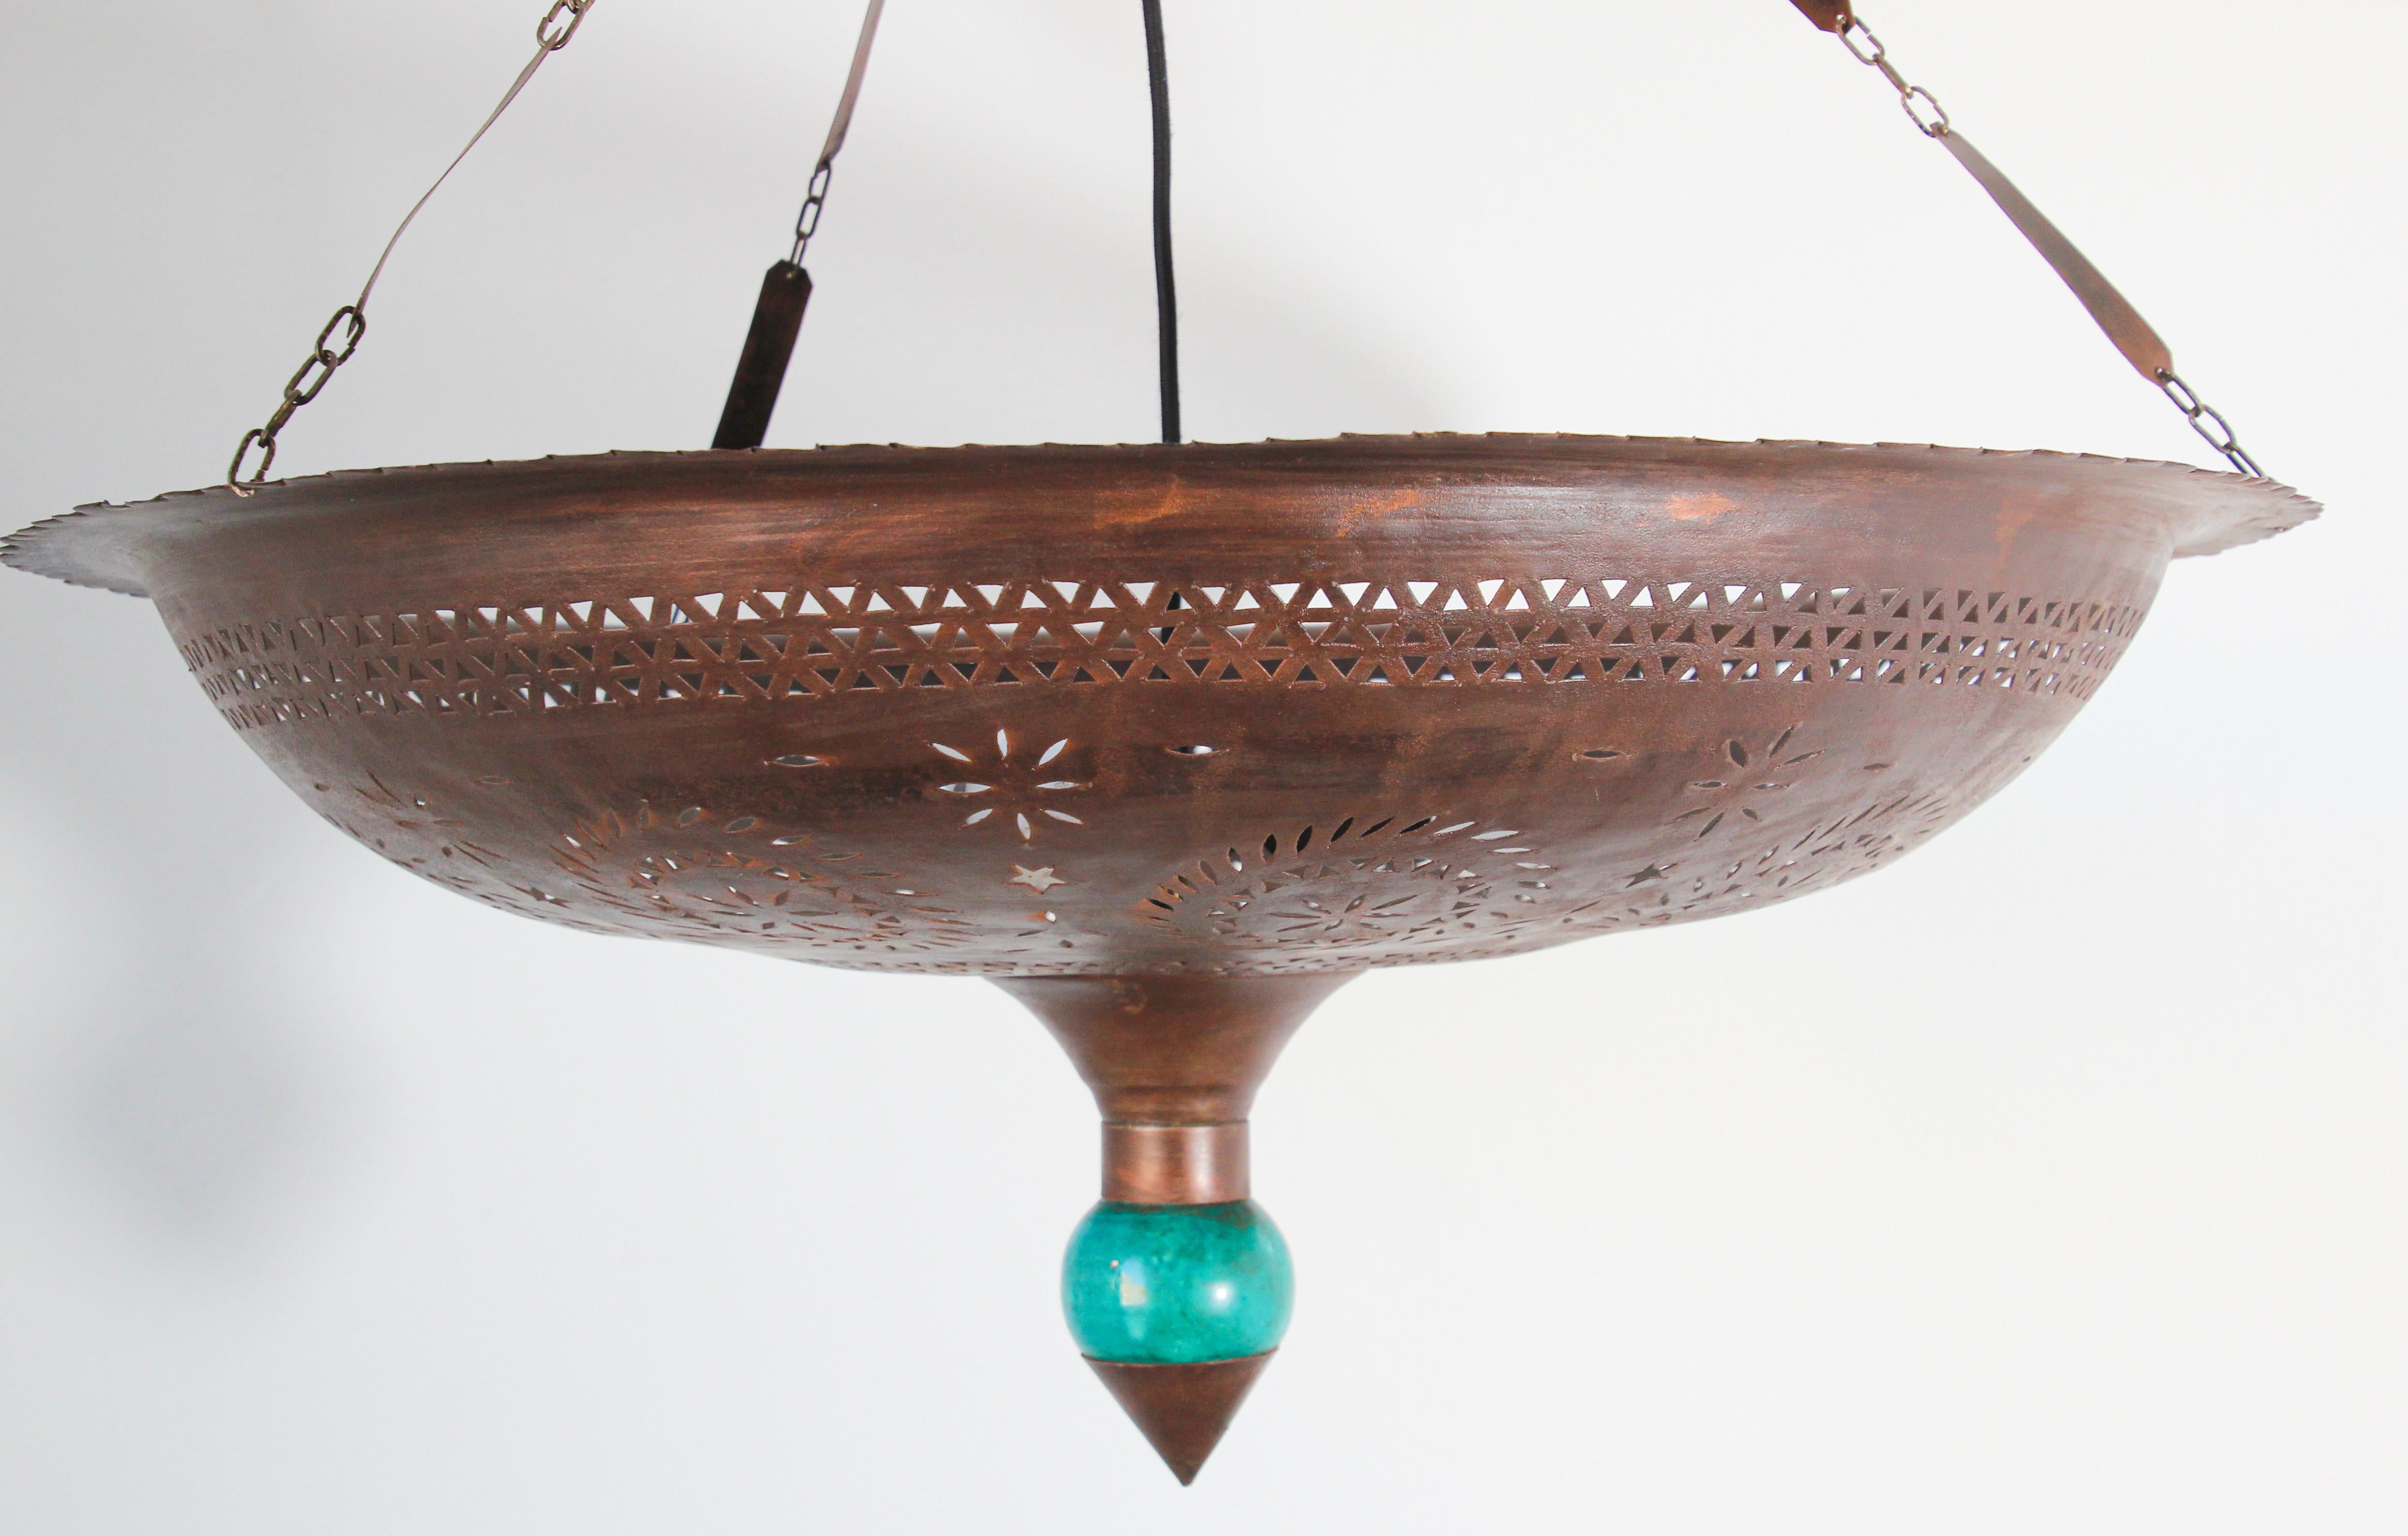 Large Moroccan Hanging Metal Ceiling Light with Turquoise Final 2